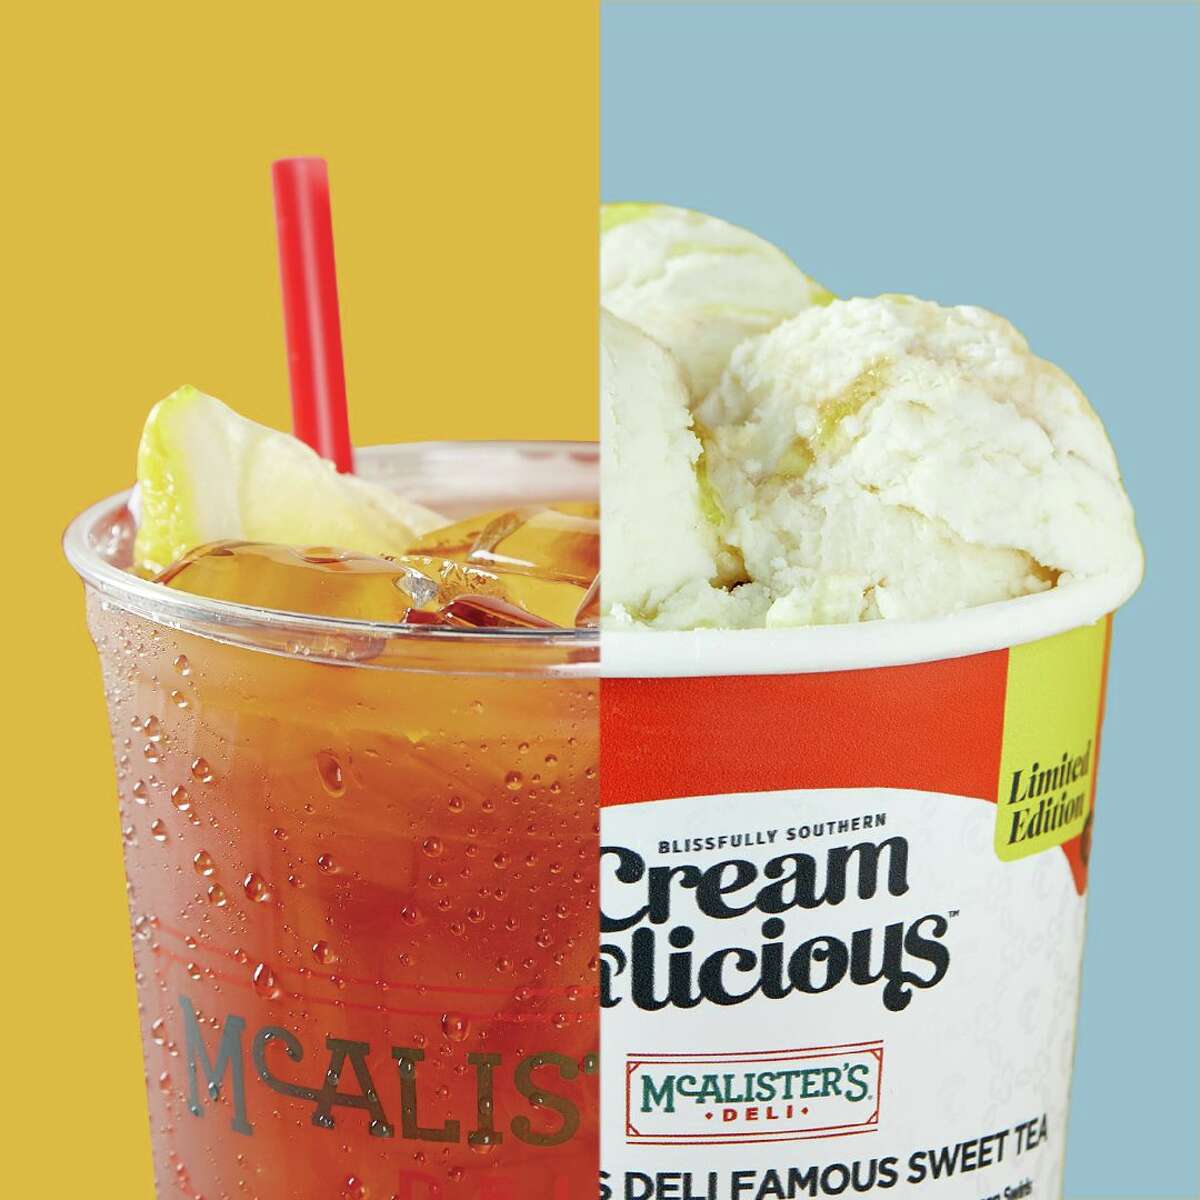 McAlister's Deli has partnered with artisan ice cream maker Cremalicious for sweet tea-flavored ice cream.